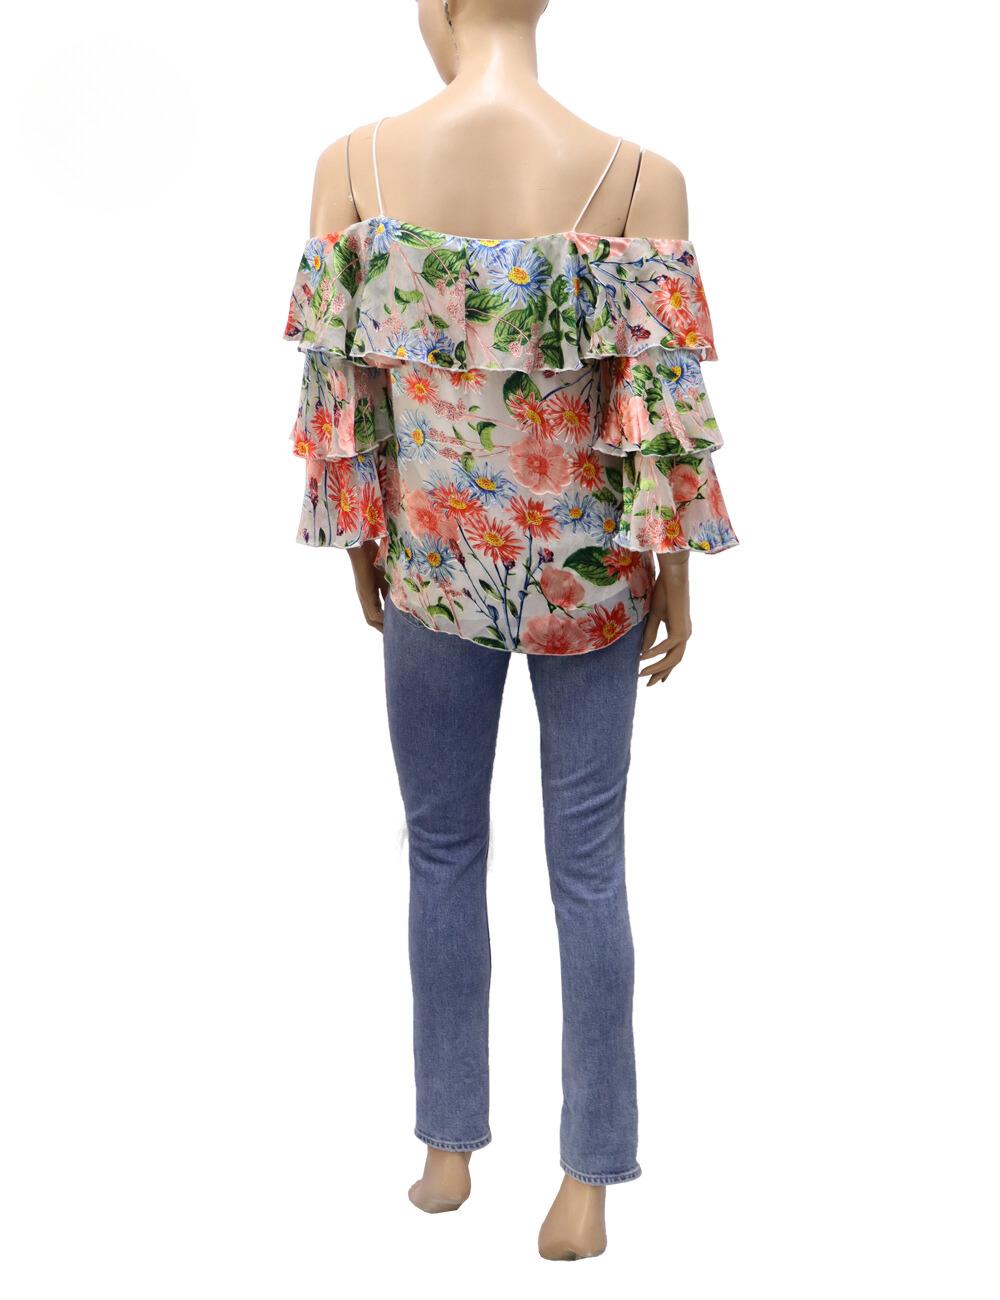 Alice + Olivia Allover Floral Print Cold Shoulder Ruched Ruffle Trim Top.

Material:  65% Viscose, 35% Silk; Lining 94% Polyester, 6% Elastane; Combo 100% Silk
Size: EU 36 / S
Condition Overall: New